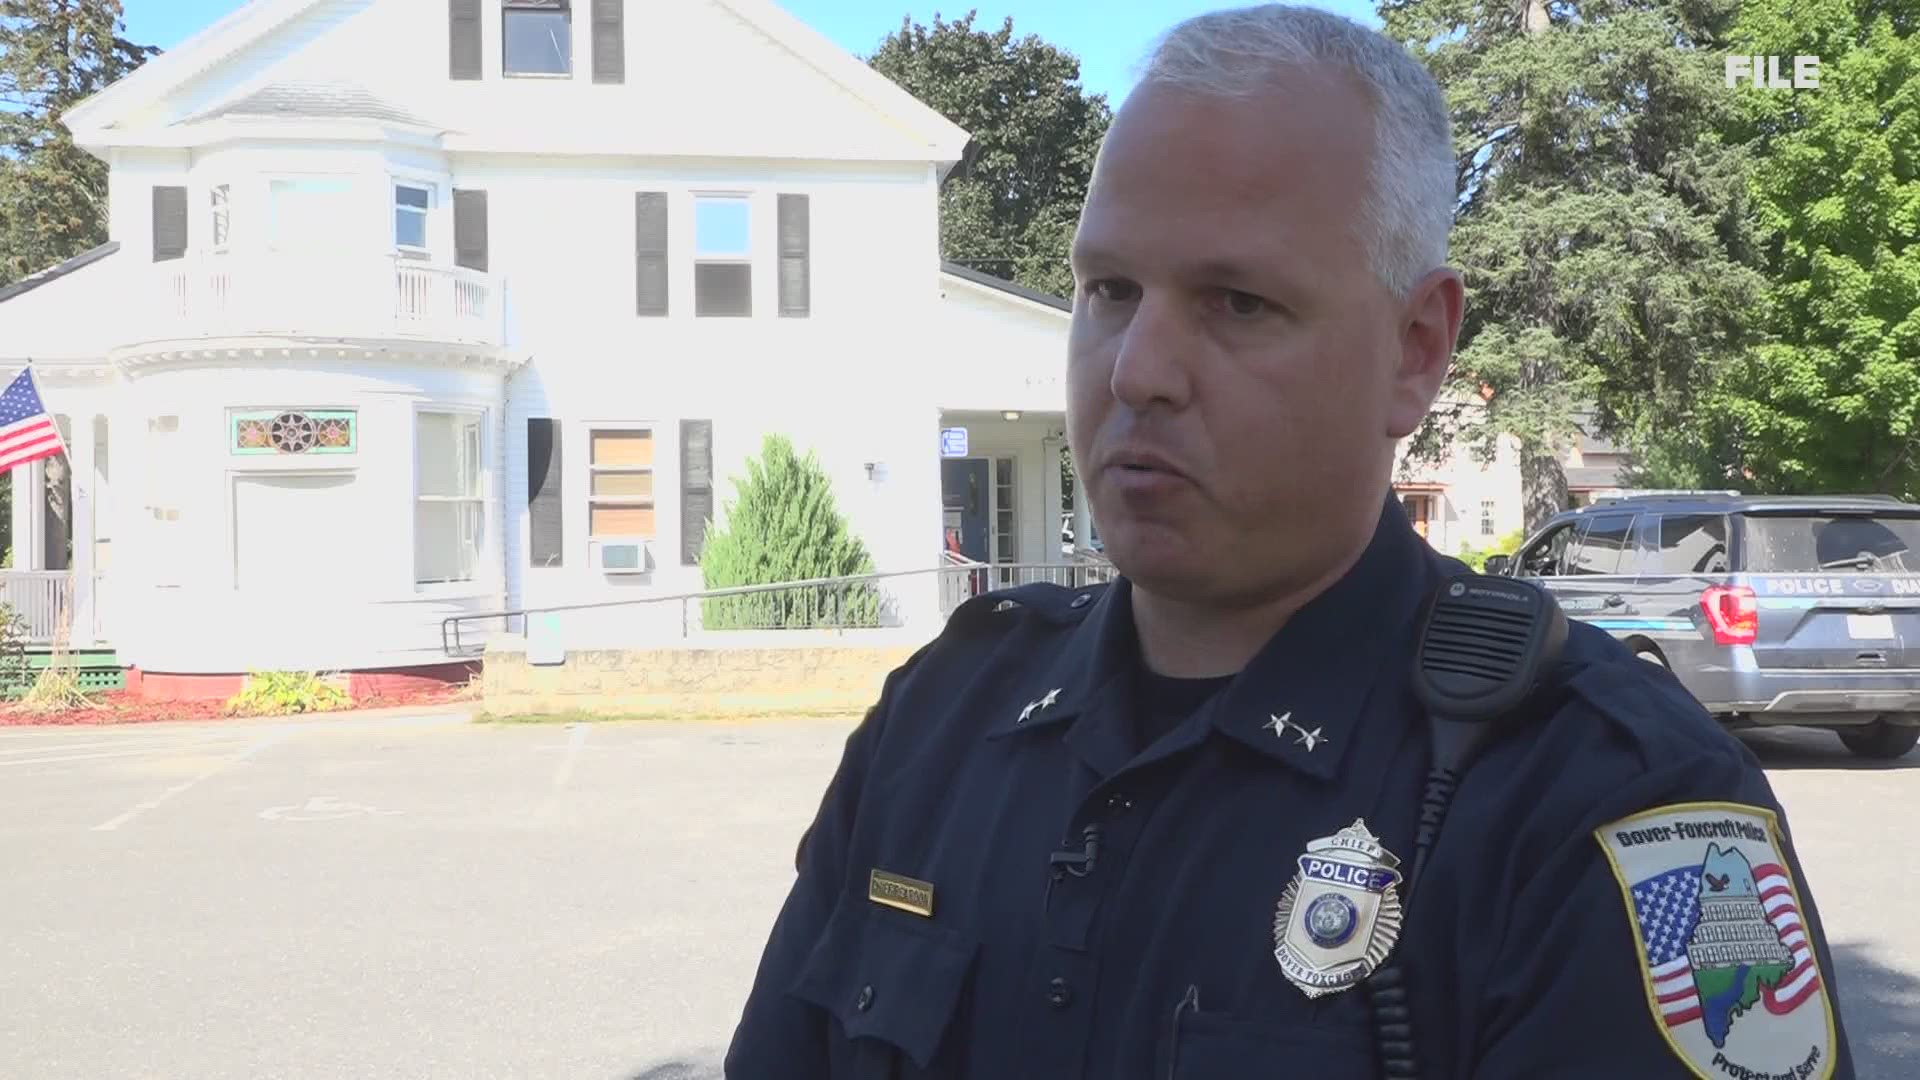 Dover-Foxcroft Chief of Police Ryan Reardon was arrested on a Piscataquis County arrest warrant on two counts, including criminal threatening with a dangerous weapon